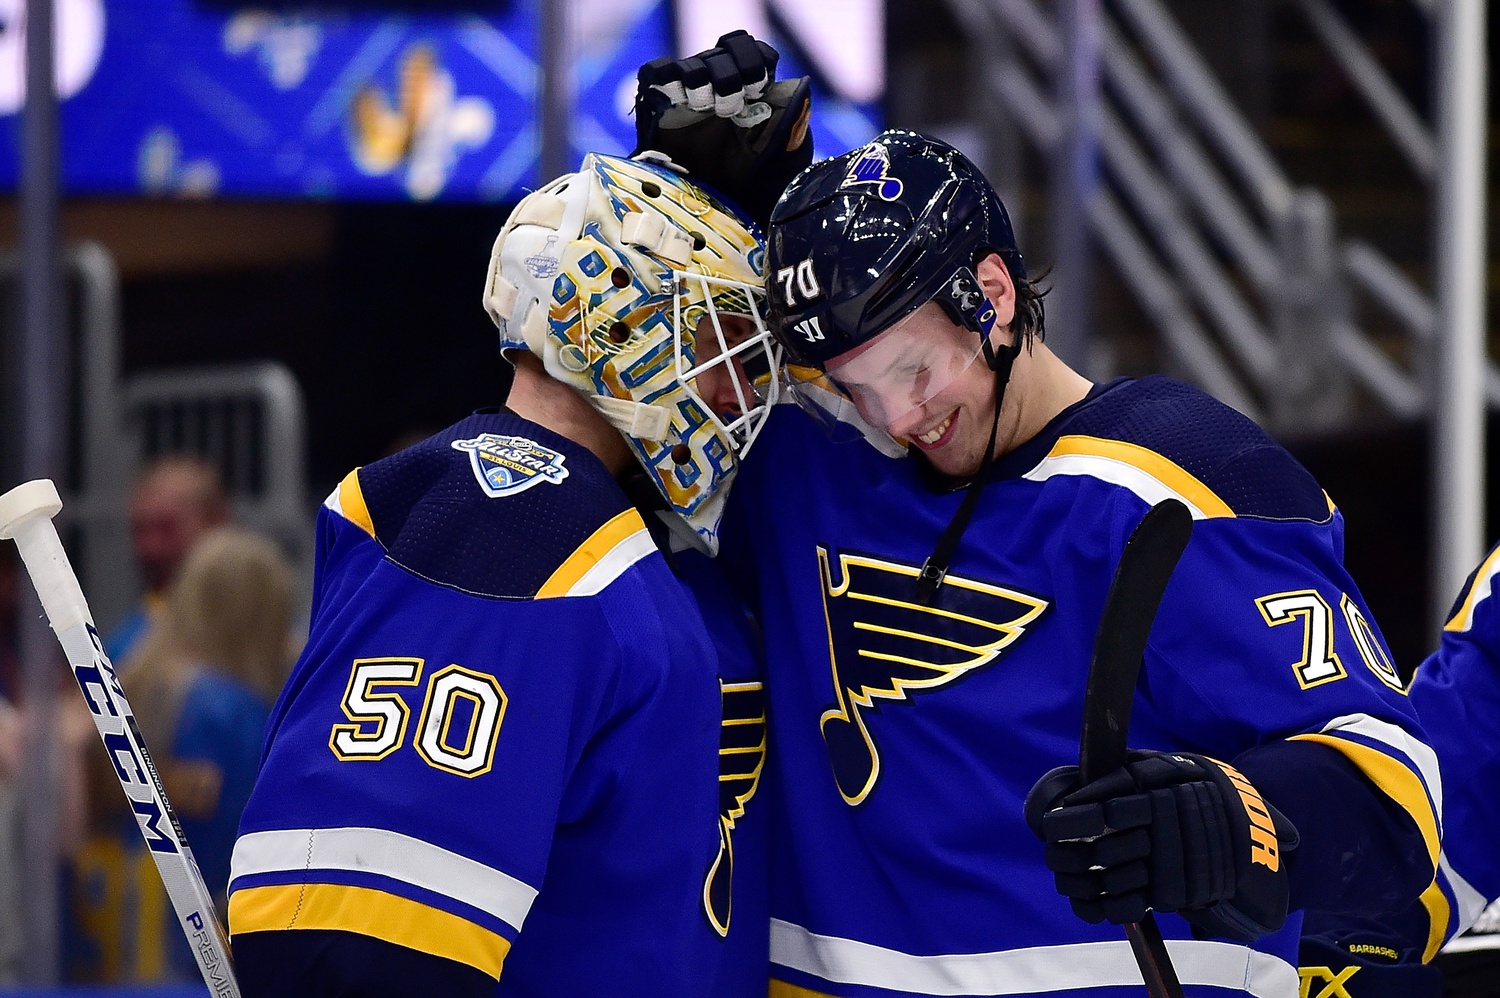 The Blues should go for it all if they're within striking distance